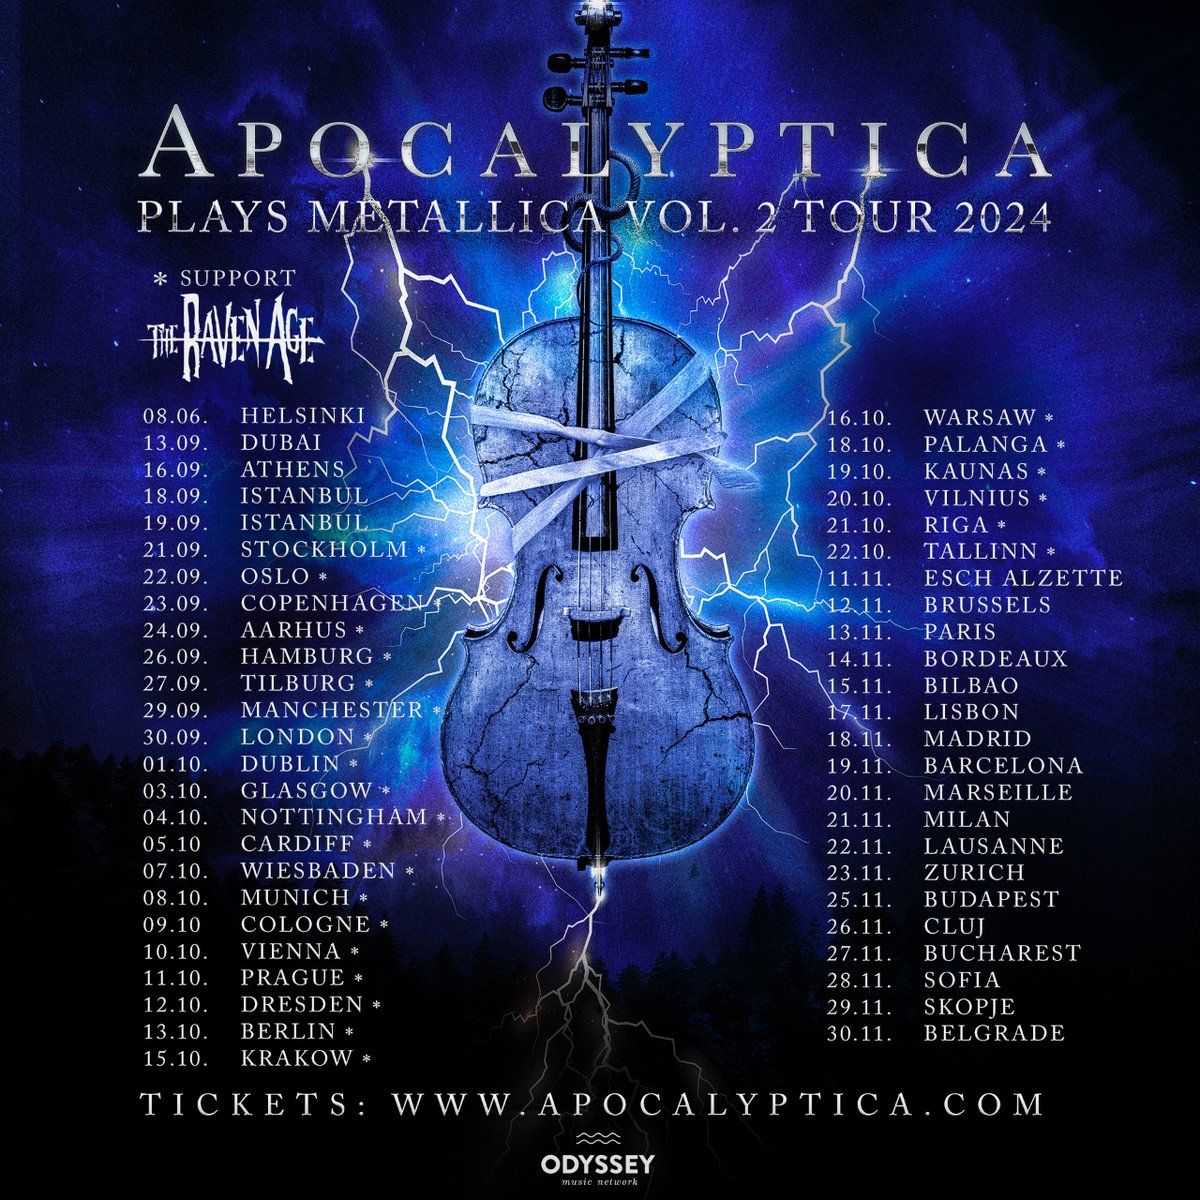 Tour Update! New concerts in ATHENS and INSTANBUL! Also happy to announce that @theravenage will be joining us at some of the tour dates as opening act. Give them a warm “🤘“ !!!

#Apocalyptica #CelloMetal #TheRavenAge #Cello #SymphonicMetal #Metal